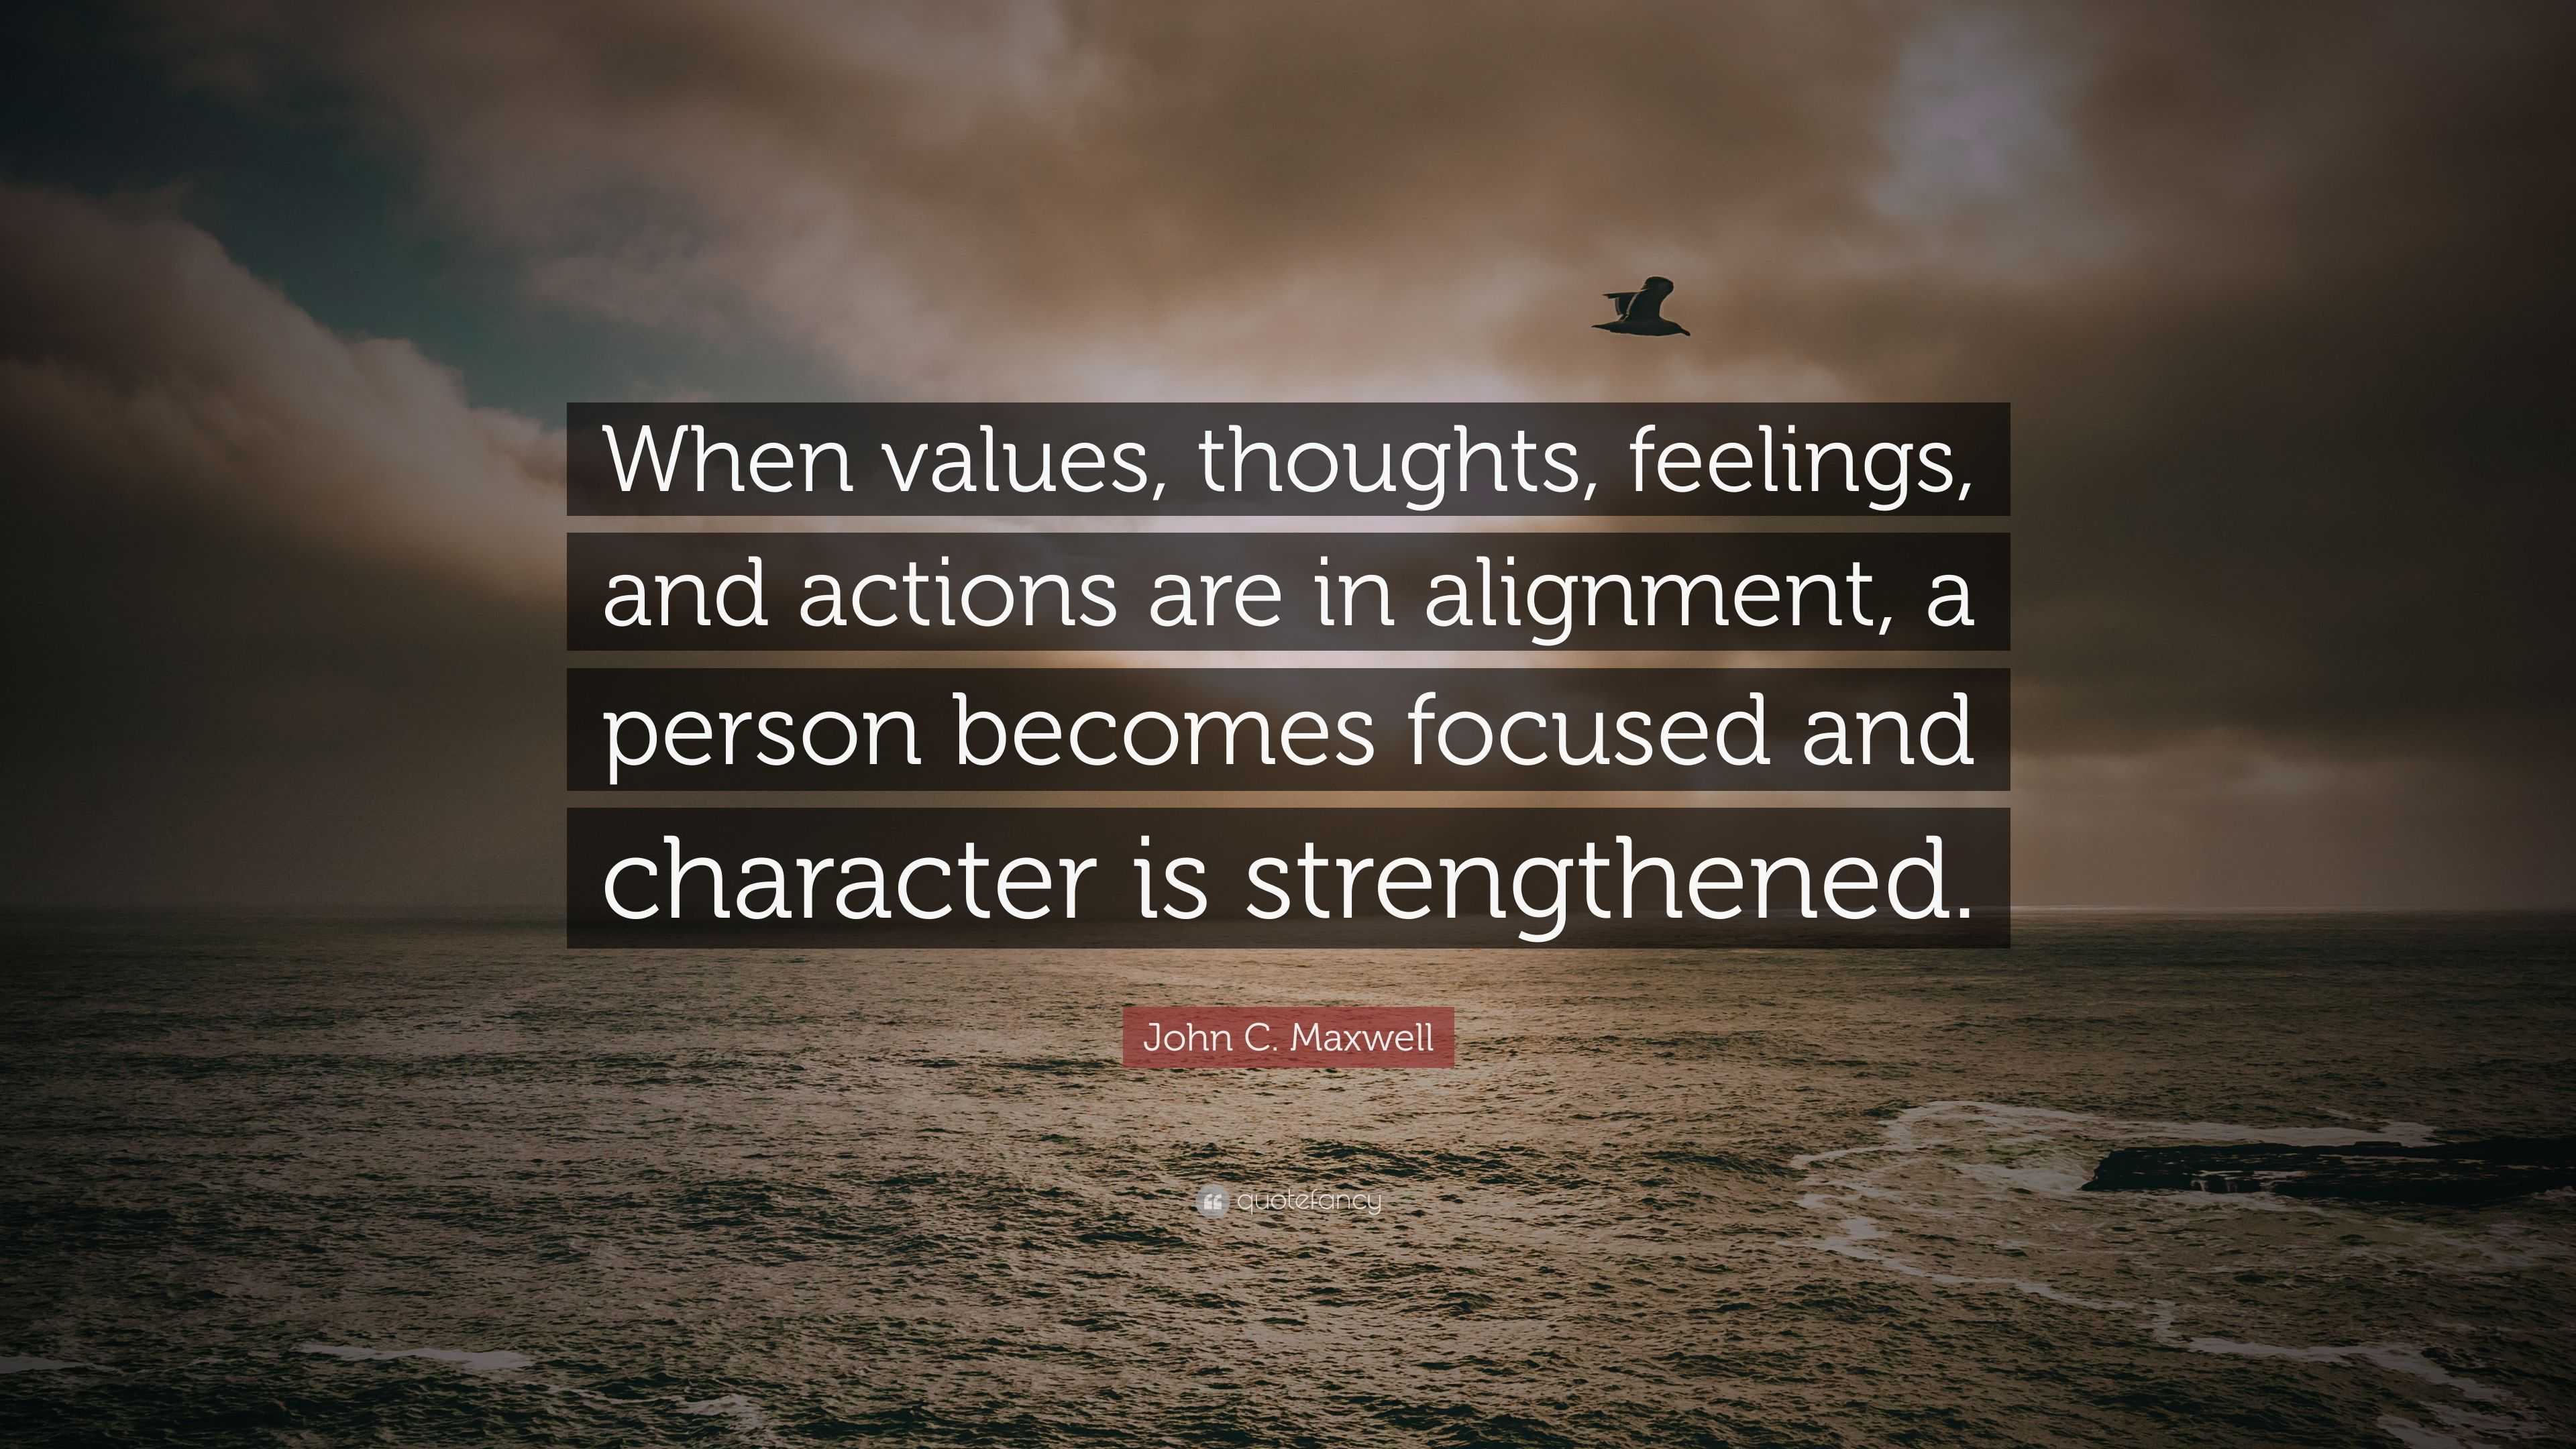 John C. Maxwell Quote “When values, thoughts, feelings